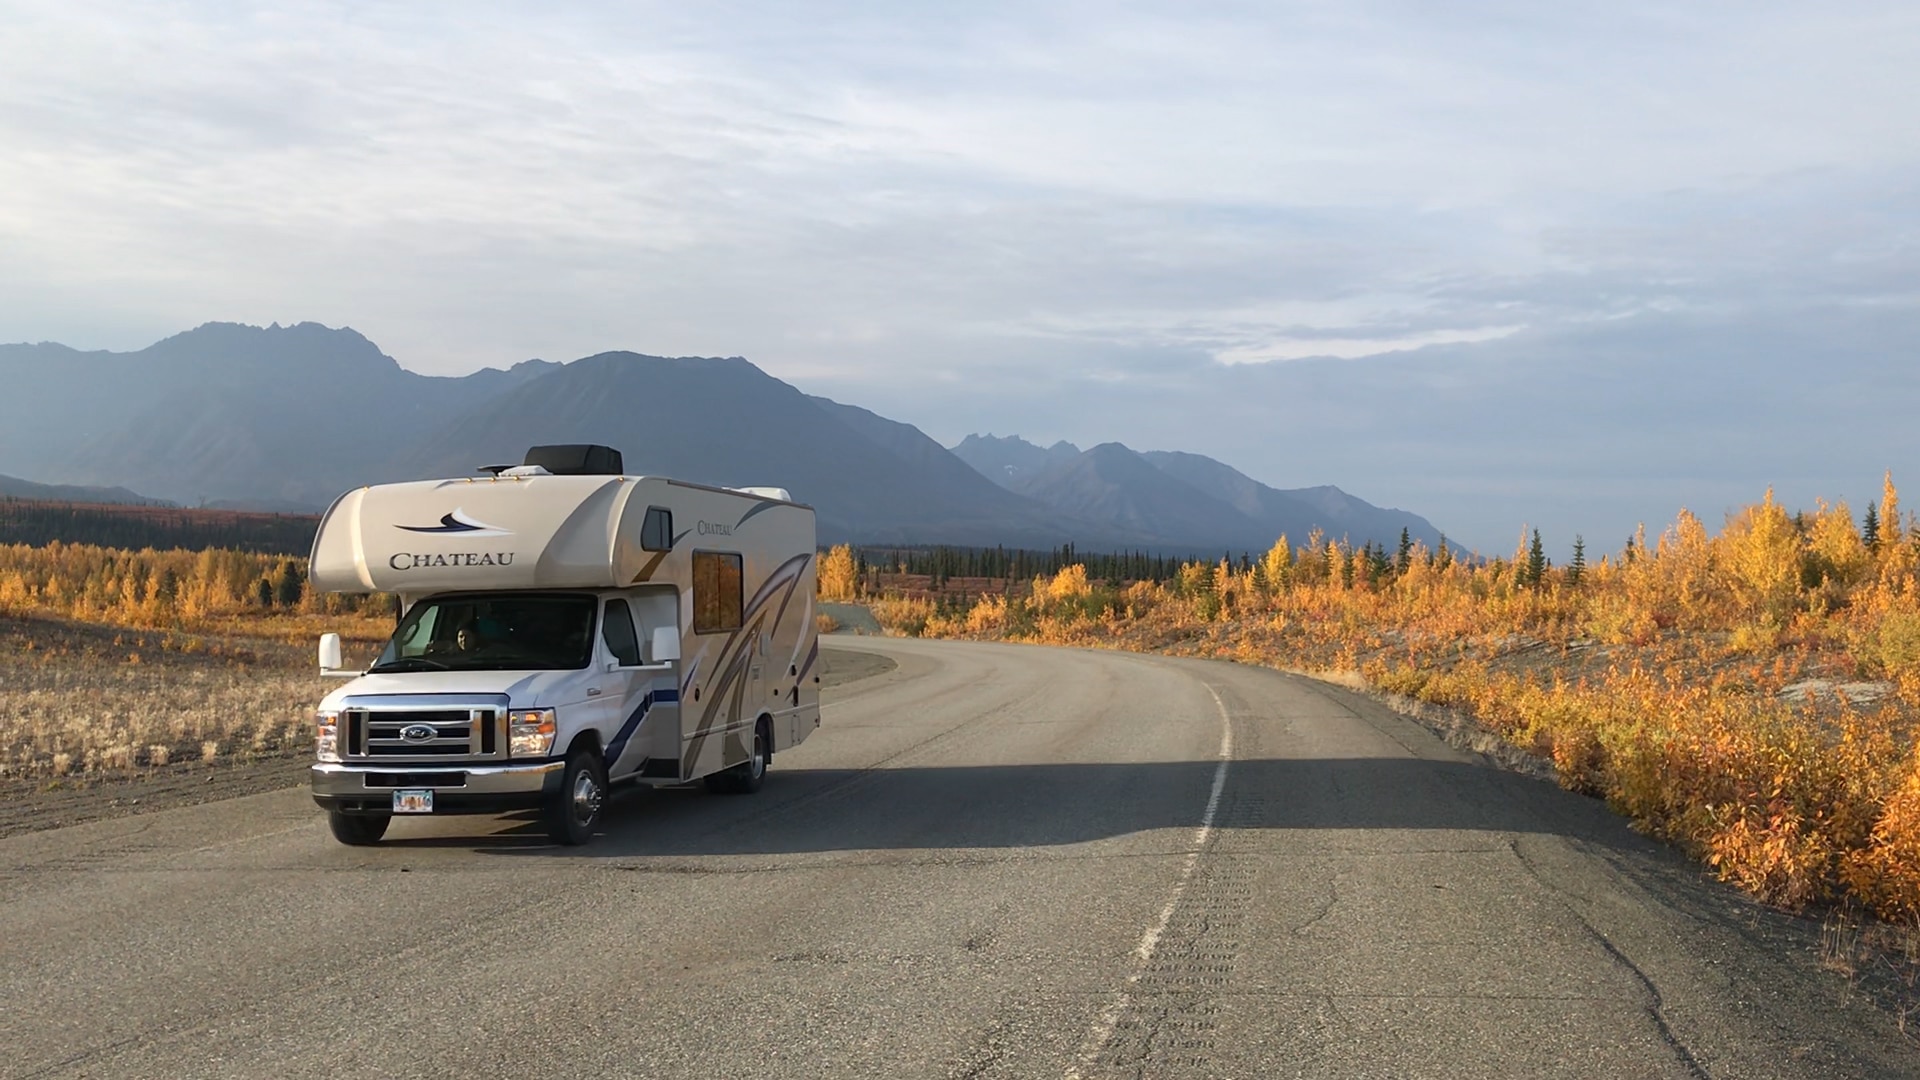 A 19-24ft Motorhome driving on a road during autumn sunset with mountain range in the background